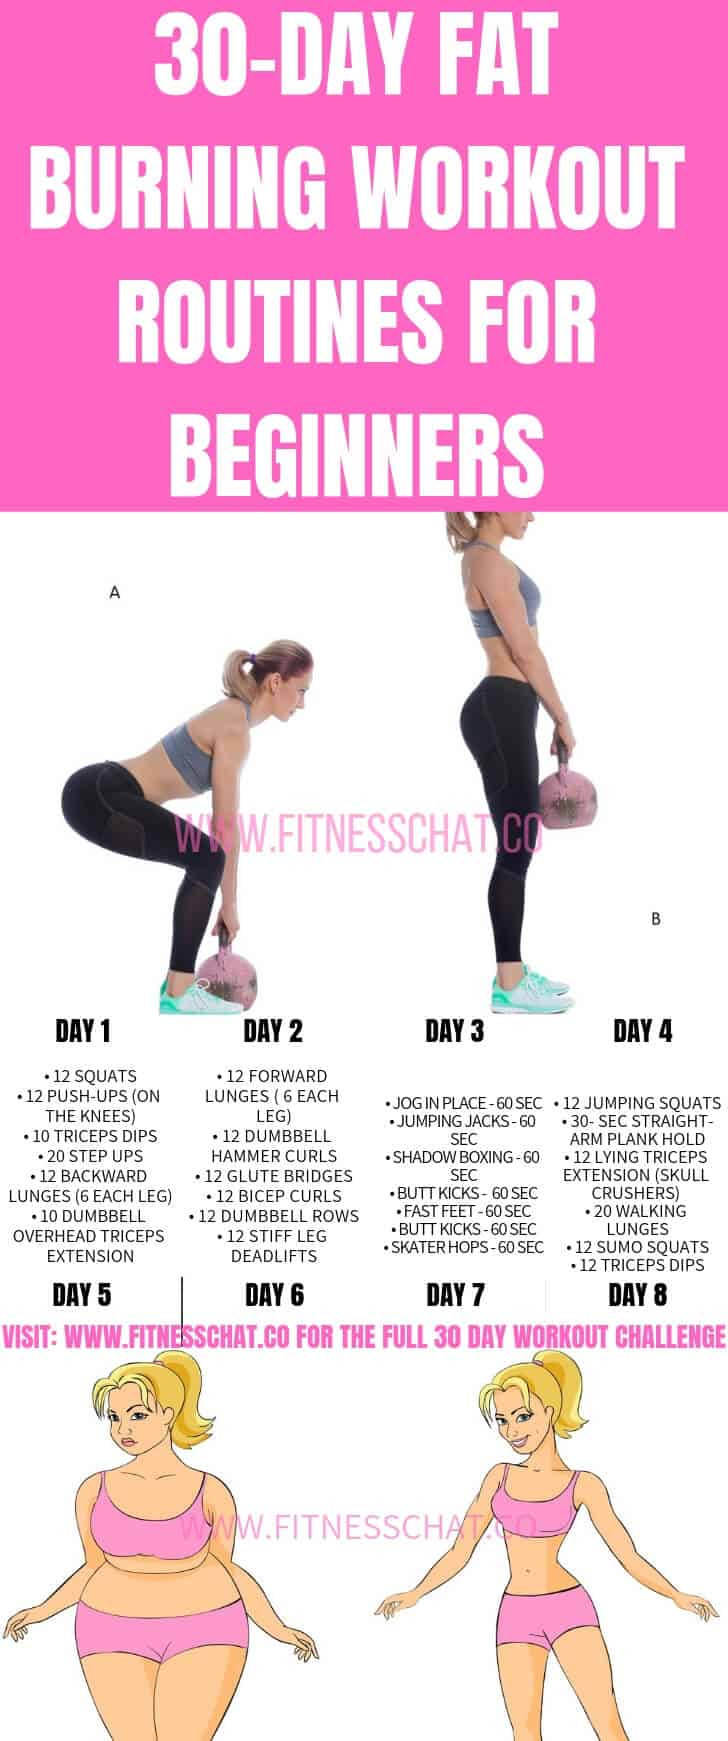 Weight Loss Exercises At Home For Women For Beginners
 30 Day Fat Burning Workout Routines for Beginners